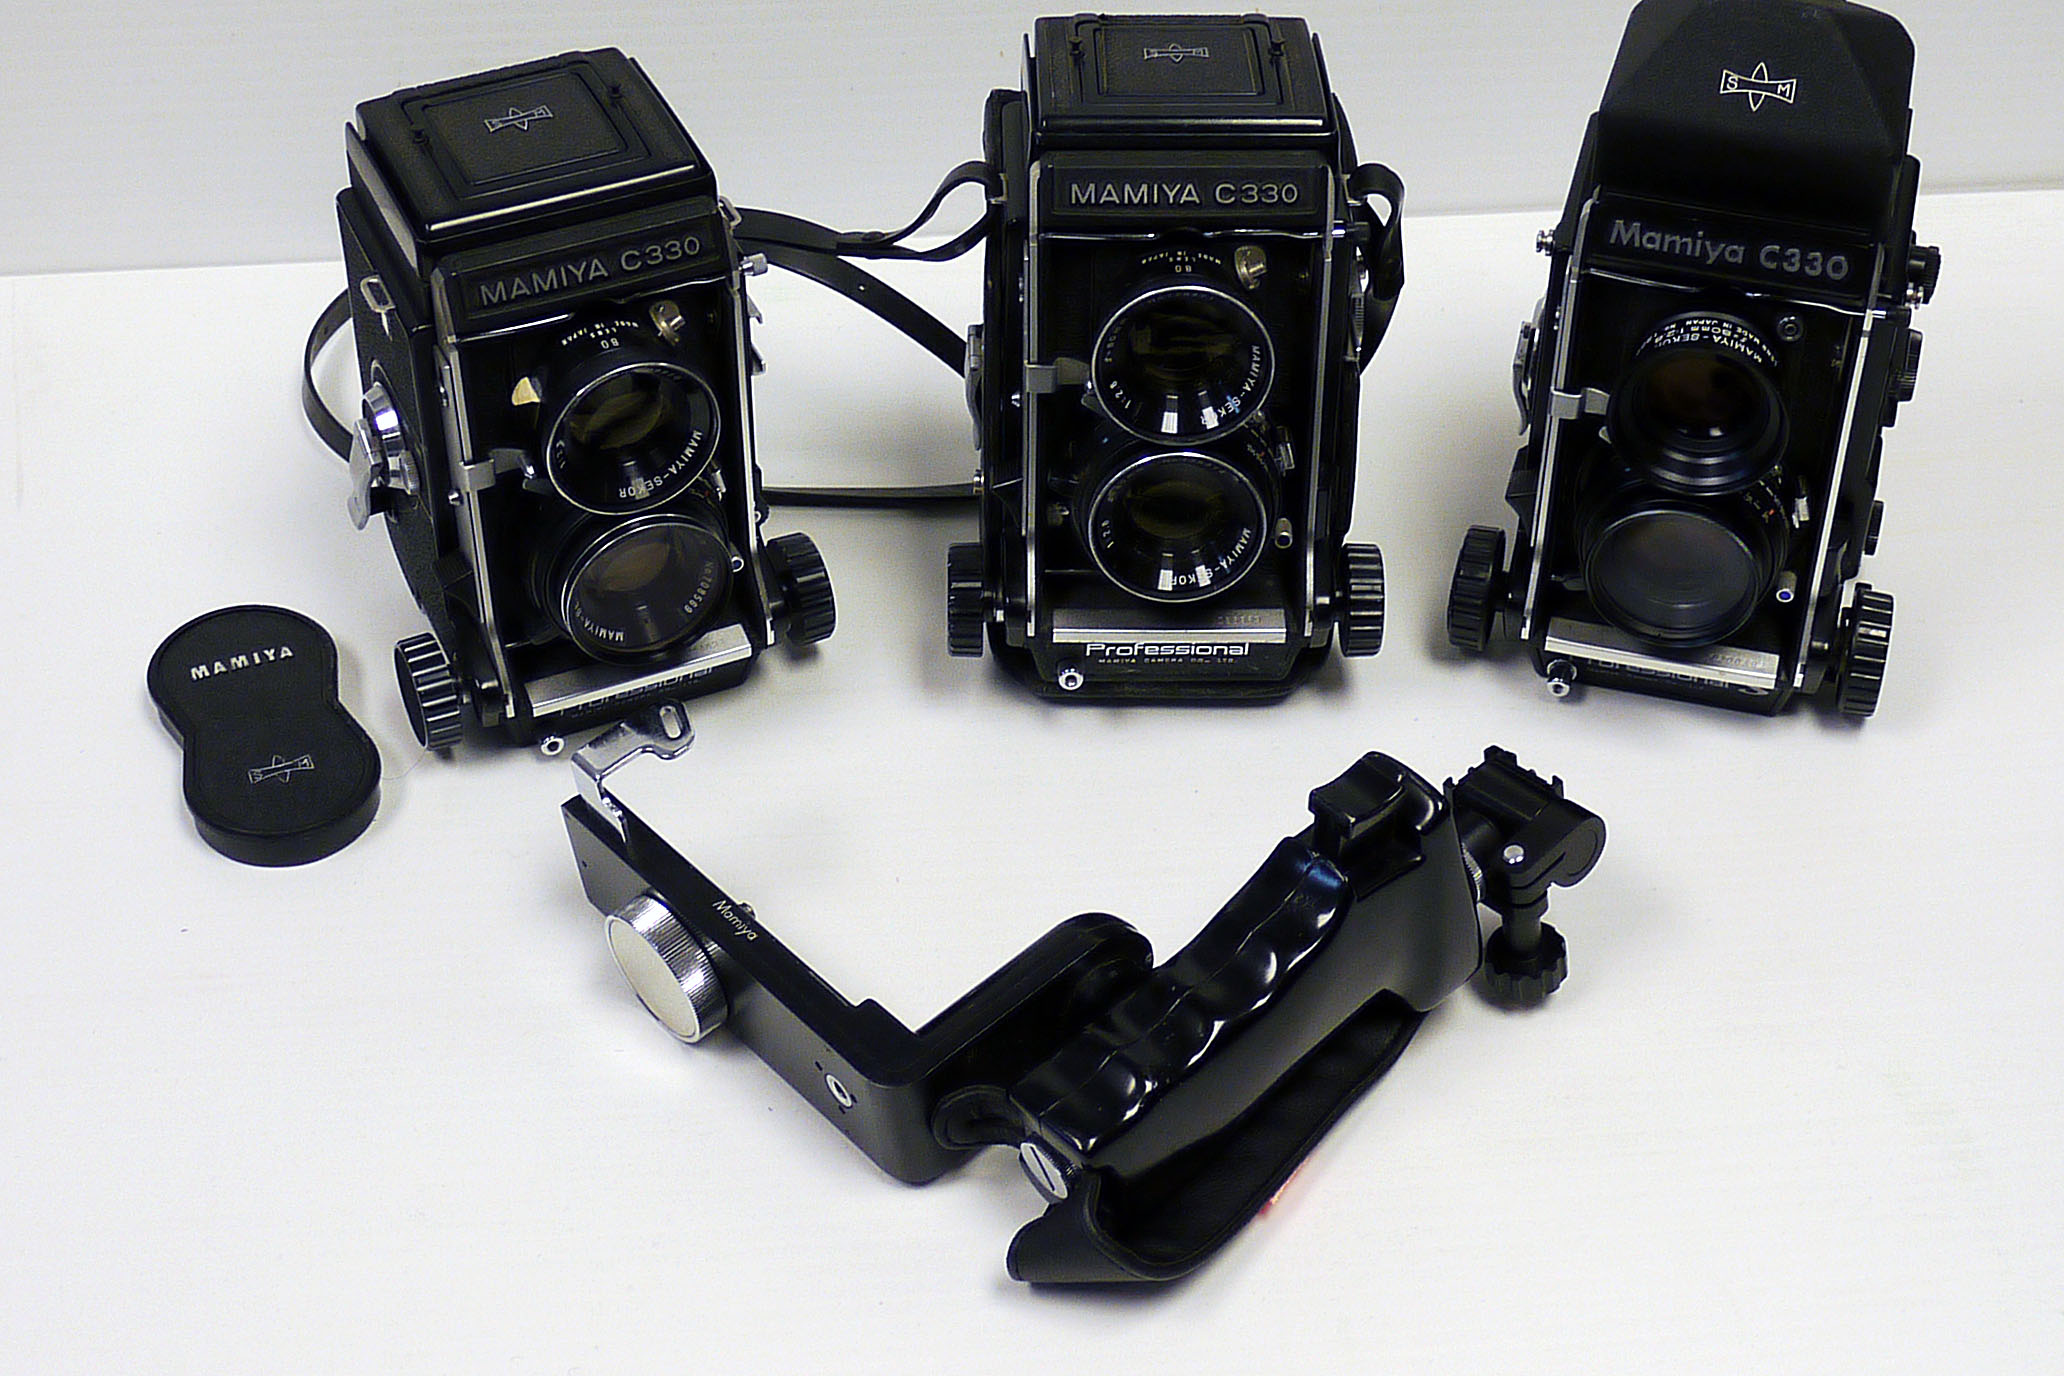 Mamiya C330 Cameras: three examples with 80mm lenses also a prism finder and Mamiya side grip (a